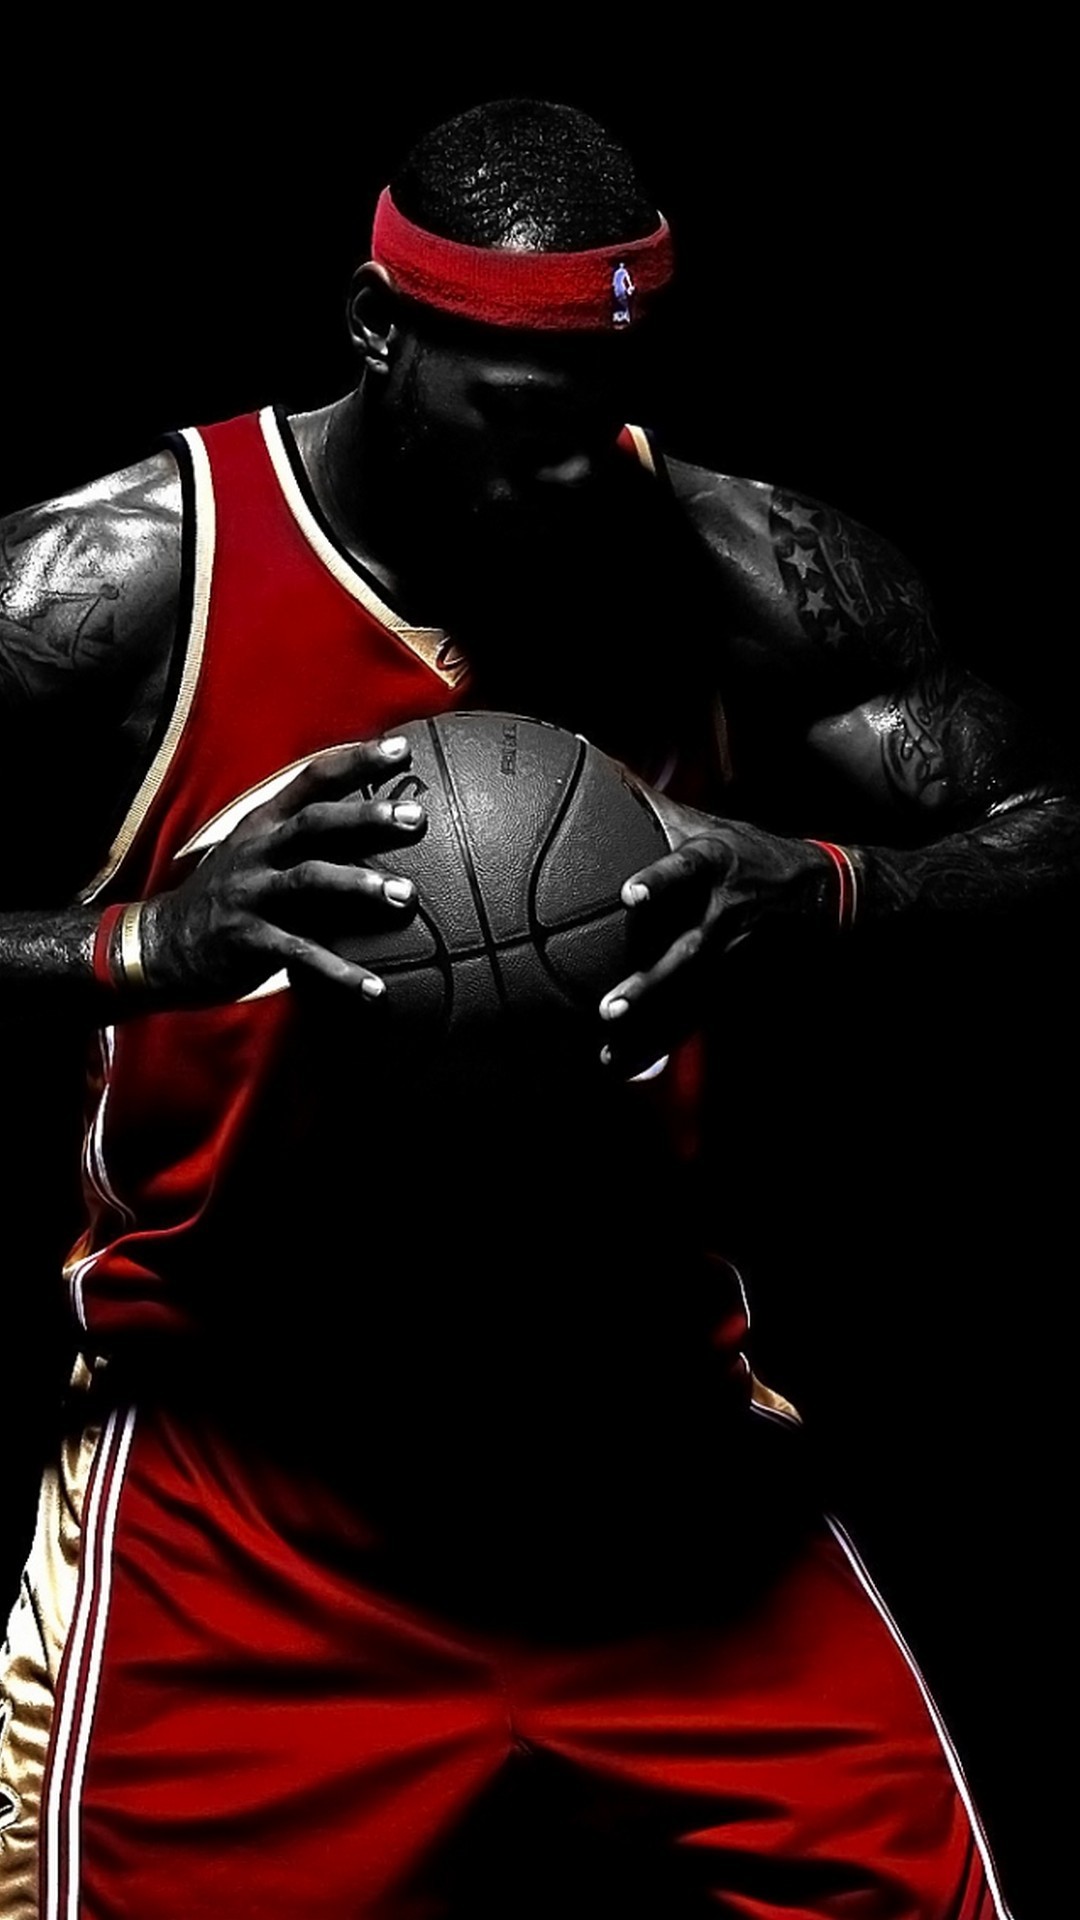 nba wallpaper hd for android,personal protective equipment,fictional character,sports gear,helmet,action figure